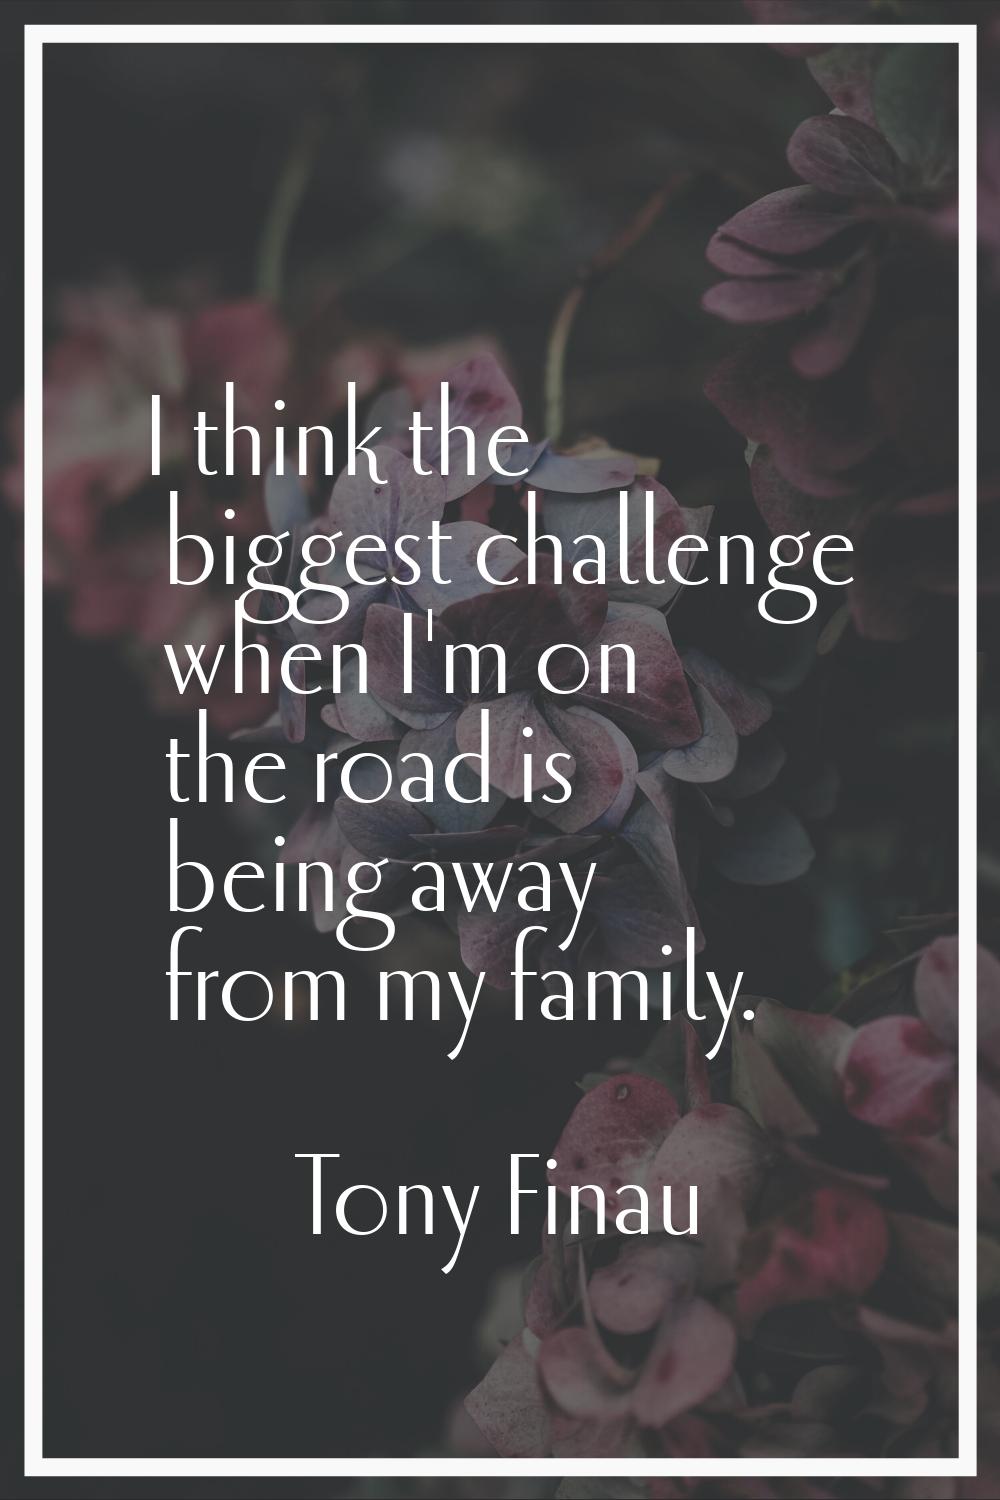 I think the biggest challenge when I'm on the road is being away from my family.